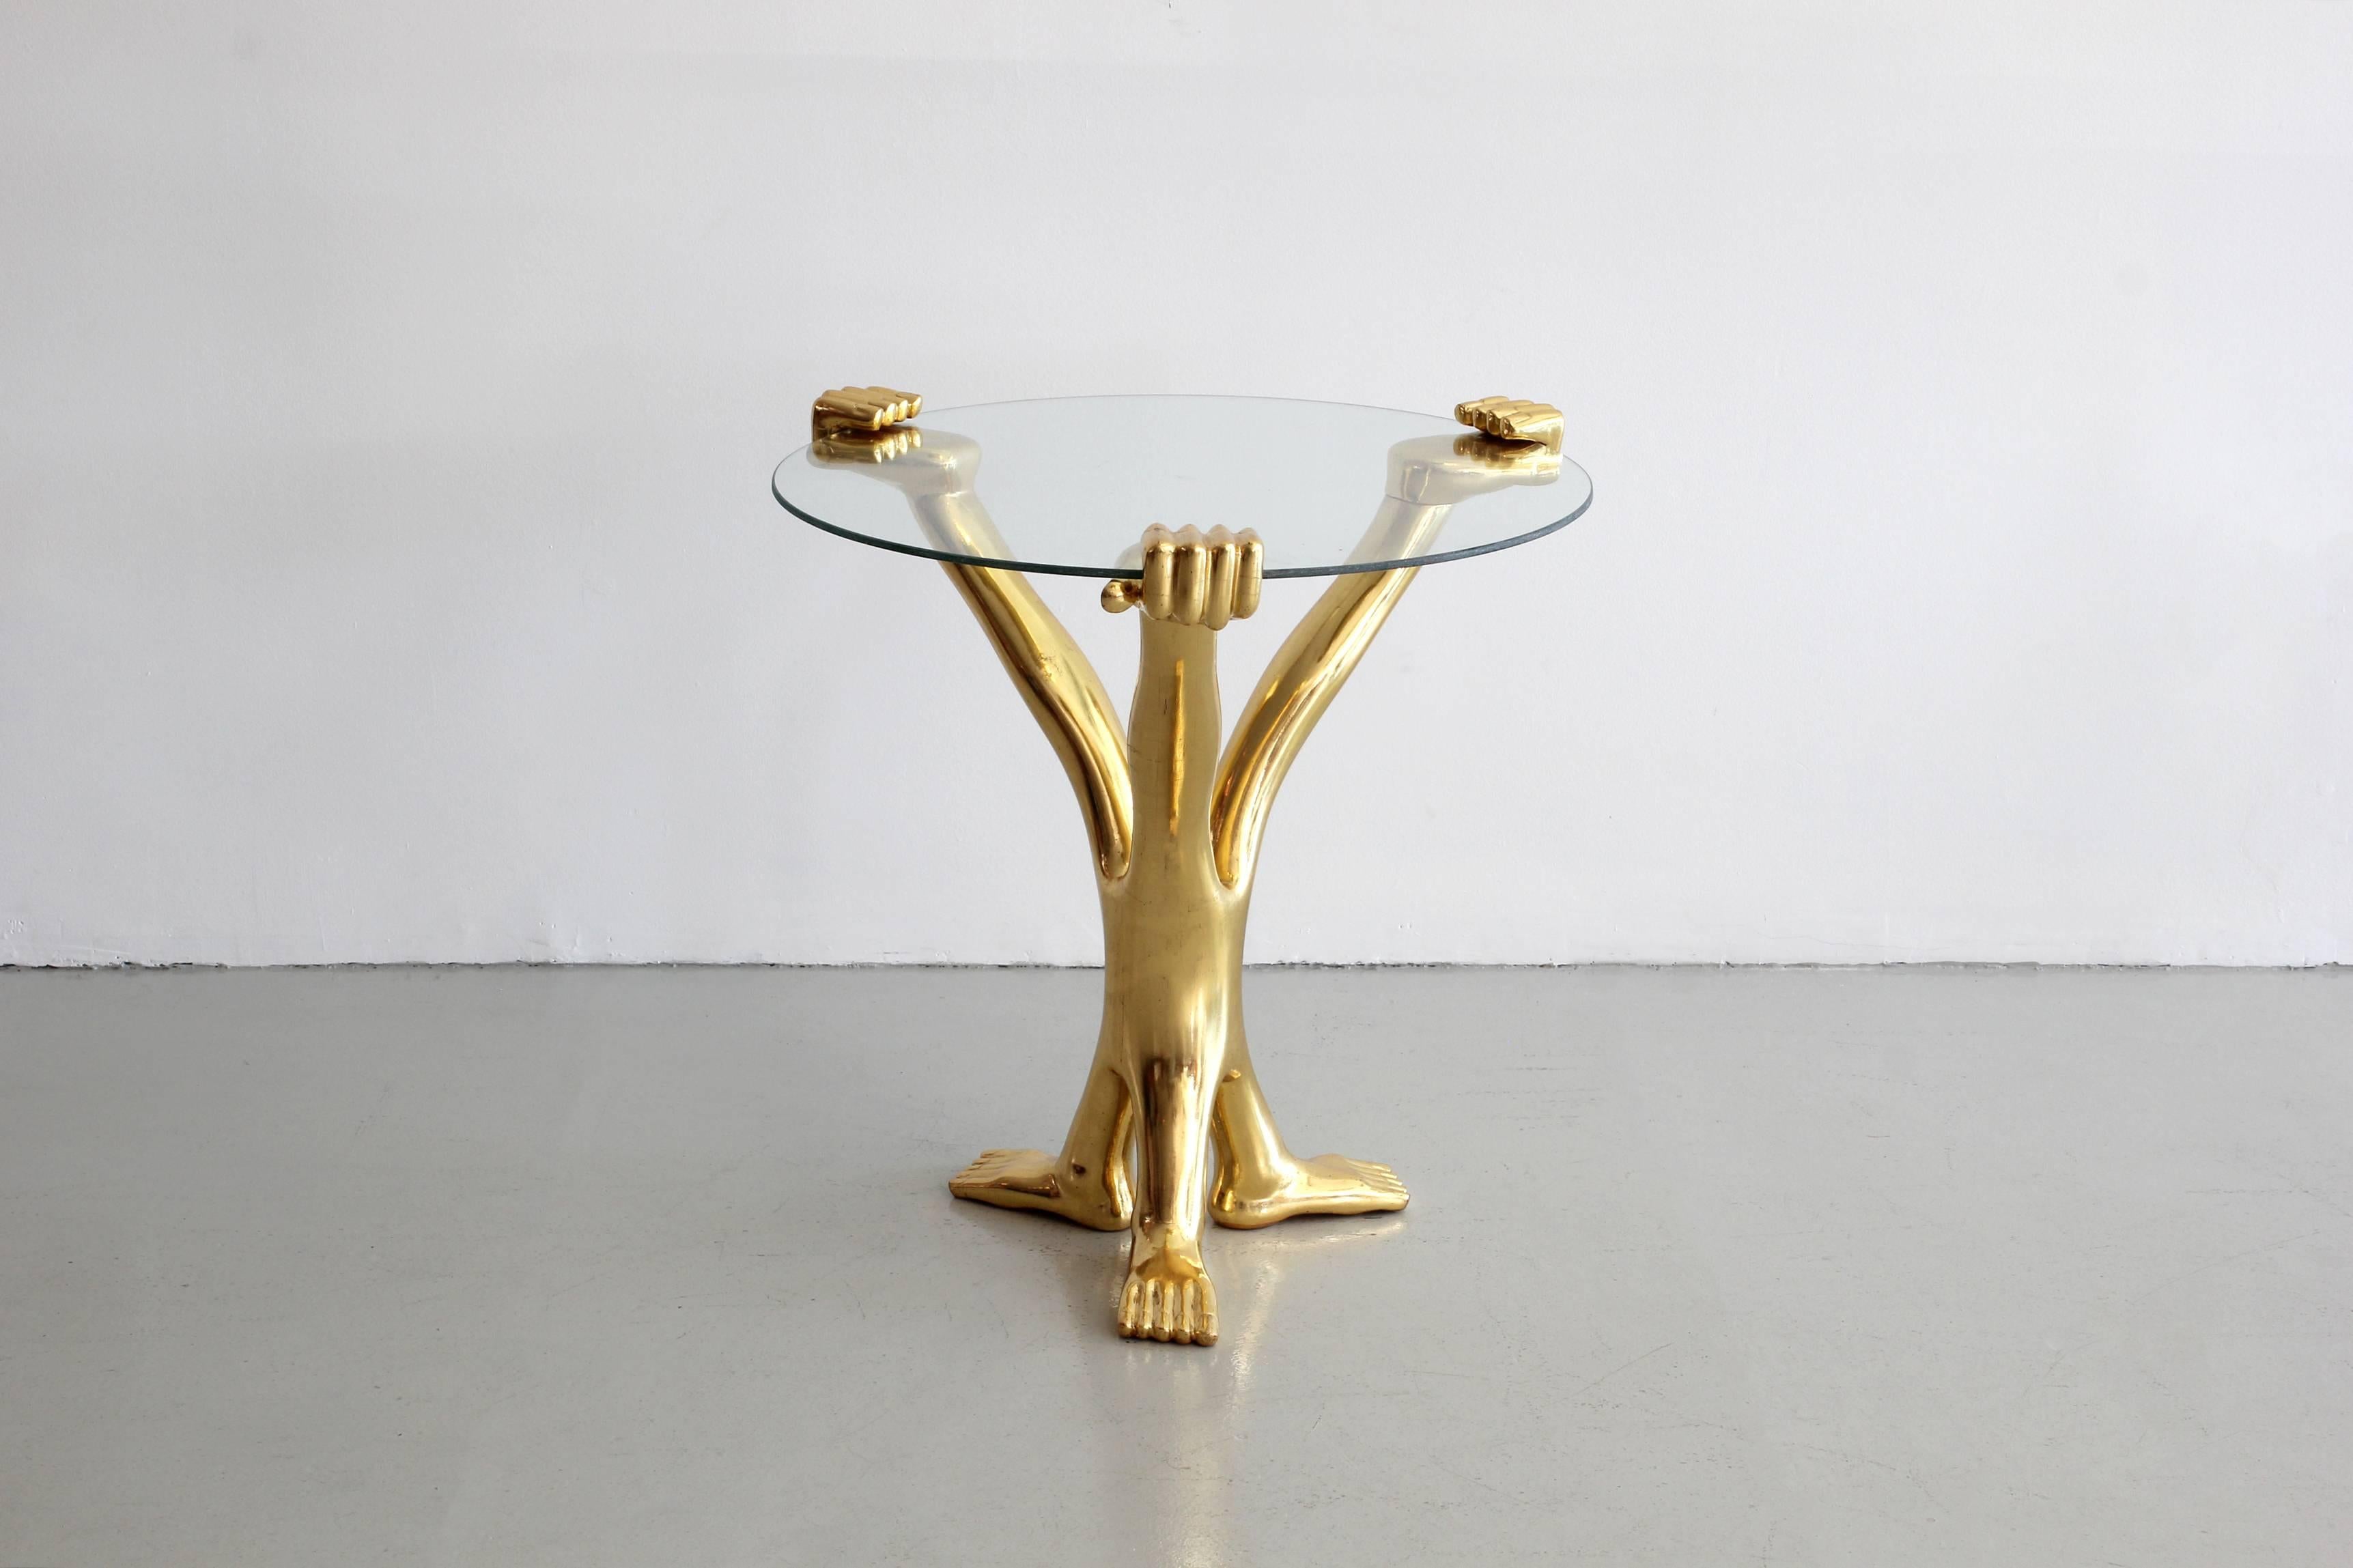 Gilt hand and foot table by Mexican designer Pedro Friedeberg.
Signed on underside of foot.